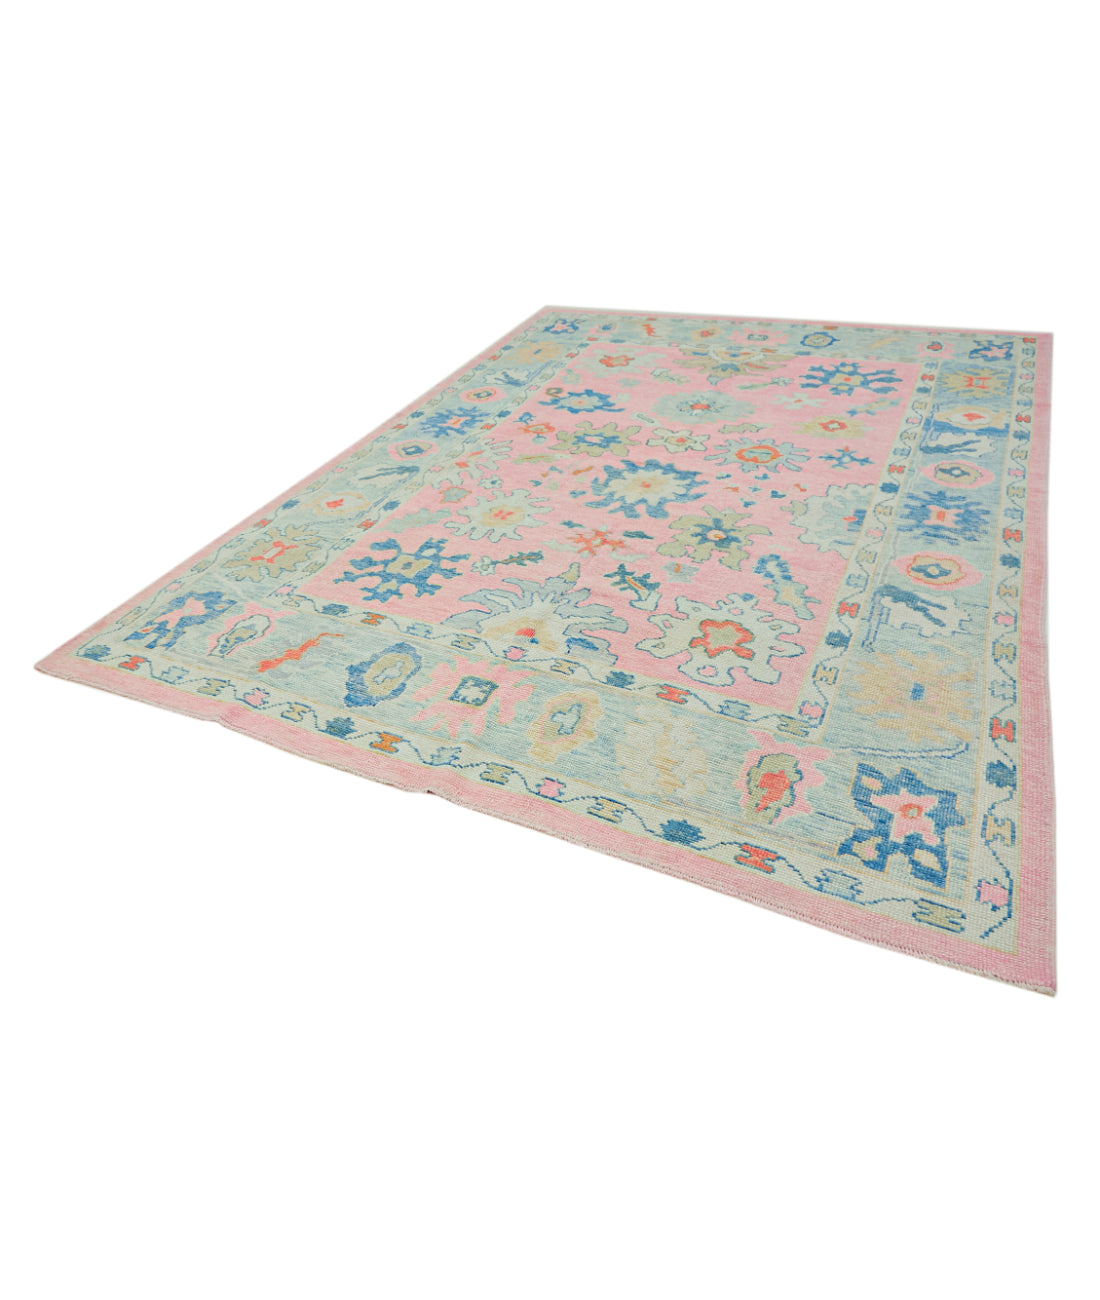 Hand Knotted Turkey Oushak Wool Rug 7'11" x 11'4" 7' 11" X 11' 4" (241 X 345) / Pink / Grey